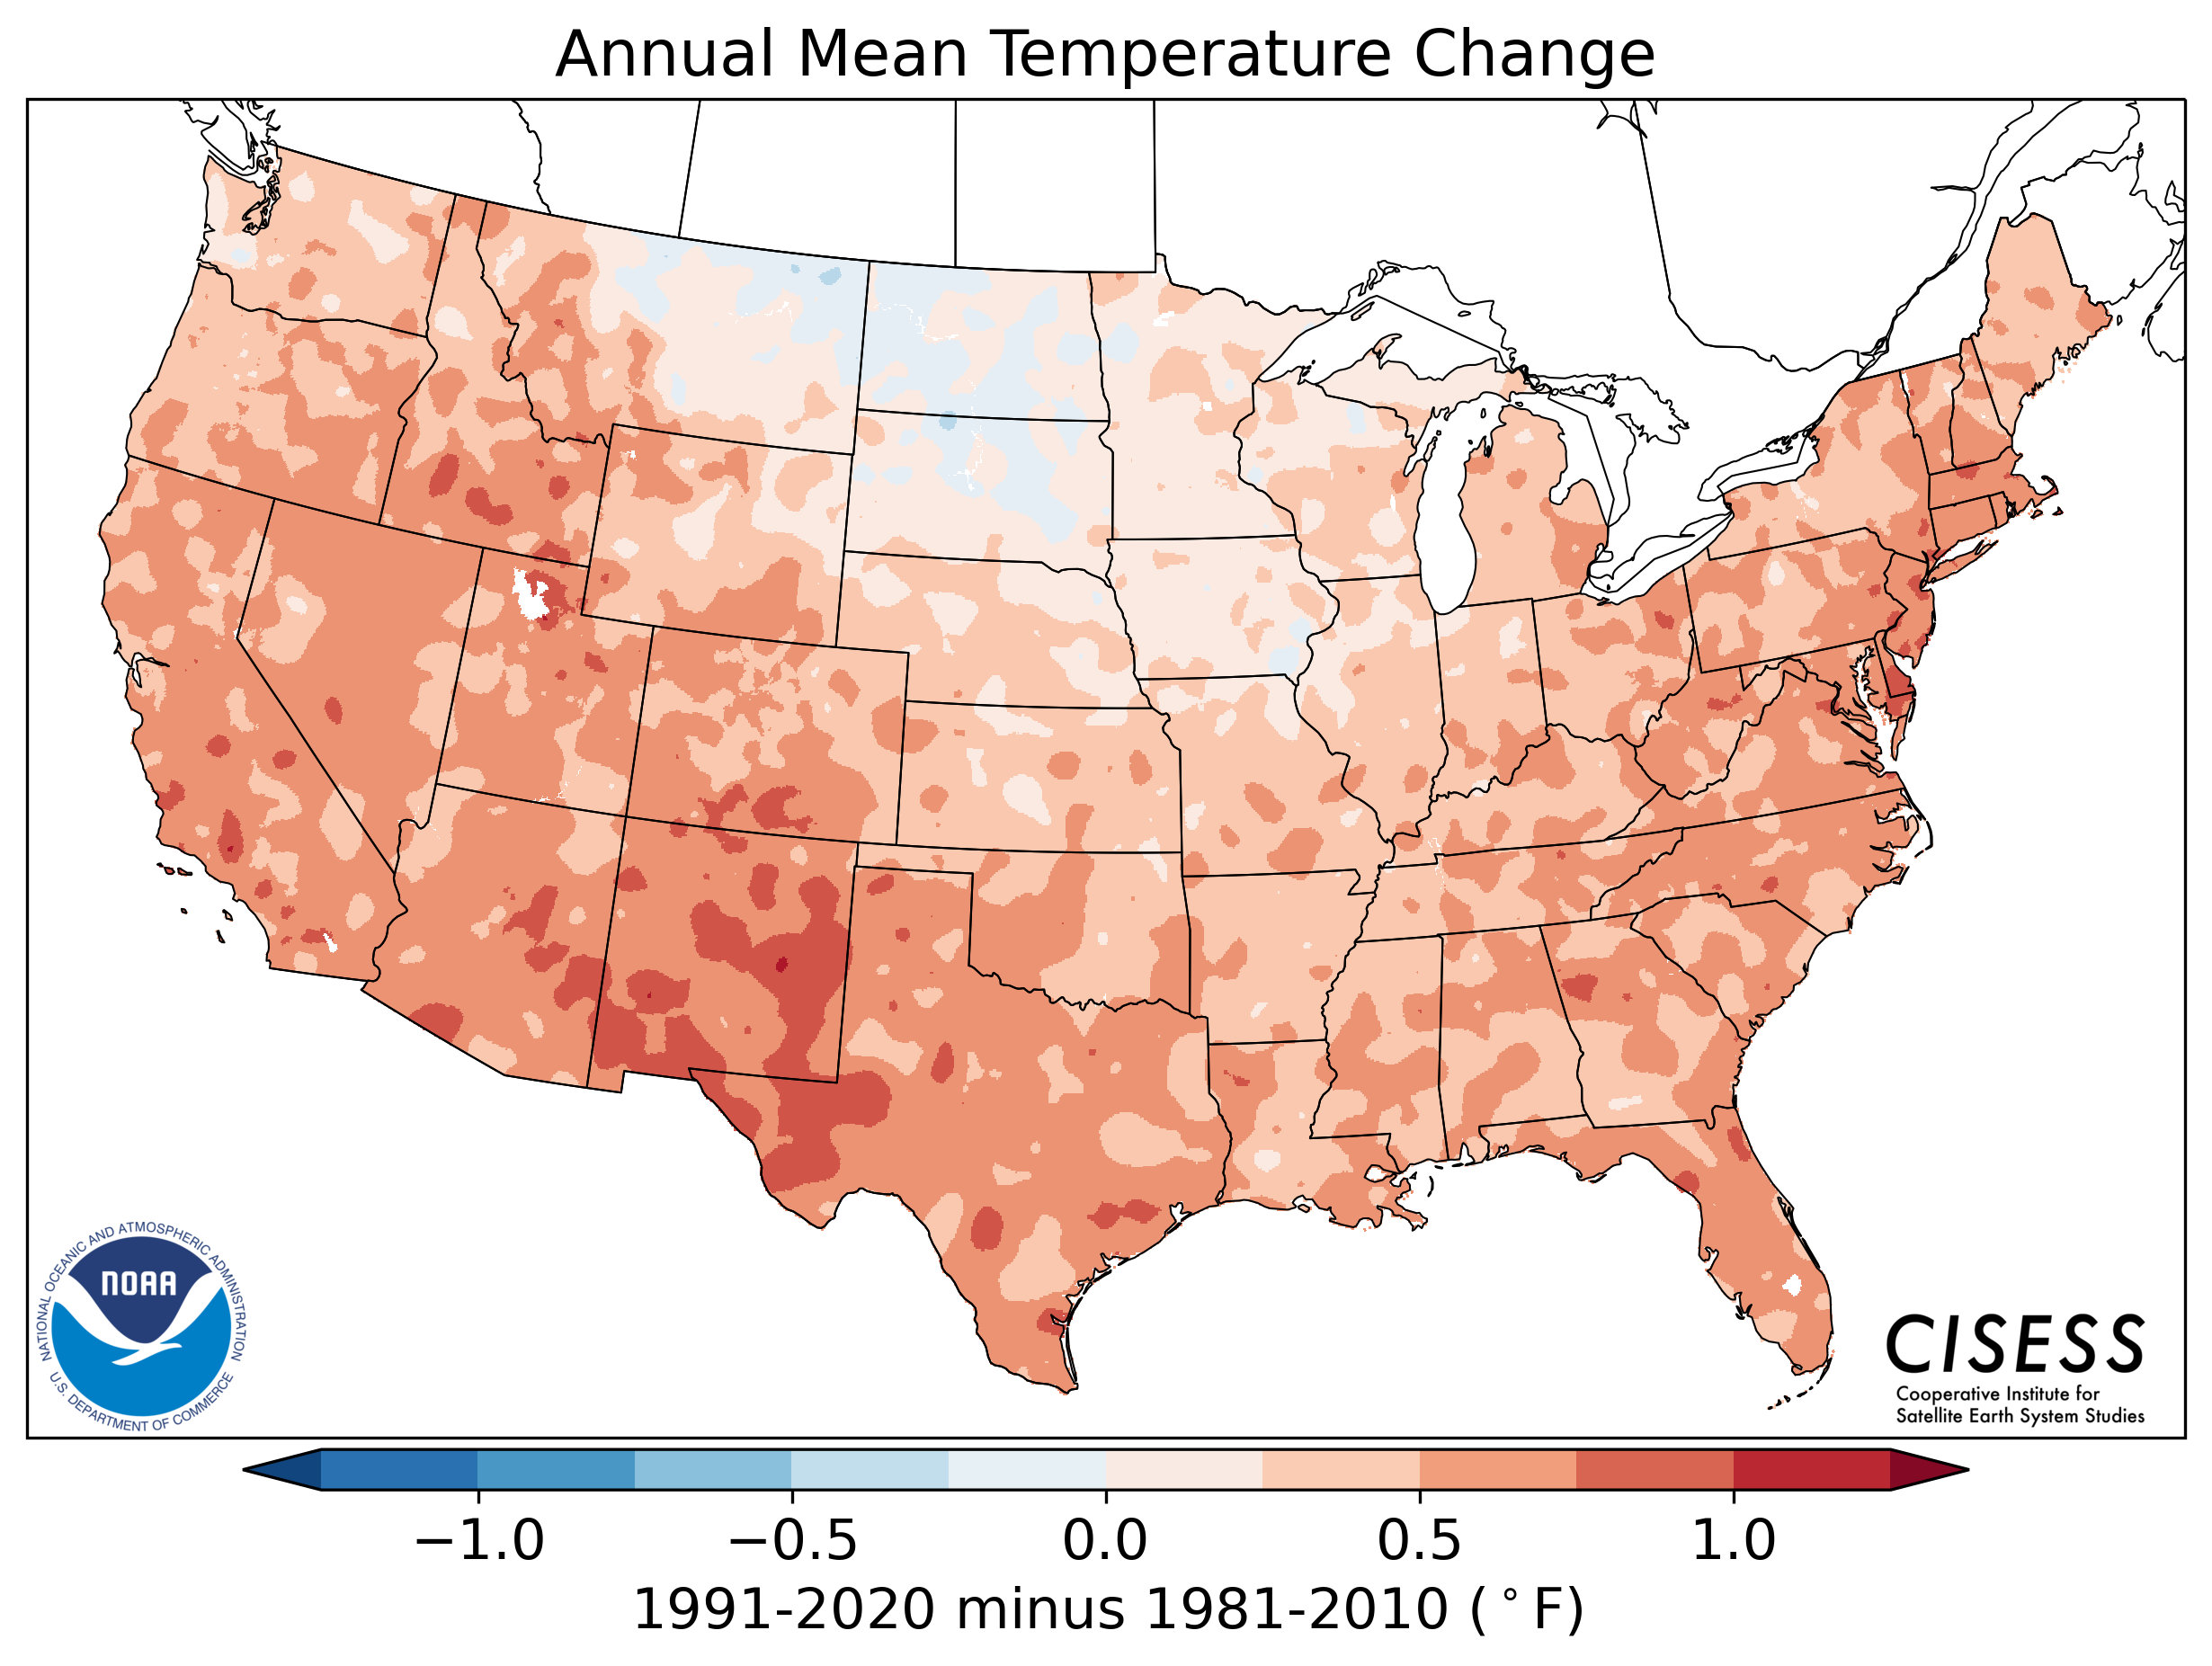 A map of the contiguous United States showing the pattern of annual average temperature change for 1991–2020 Normals minus the 1981–2010 Normals. Colors range from light blue for slightly cooler normals (-0.3 Deg F) through lighter blue and pink near zero difference to red for warmer normals (+1.0 Deg F). Almost the entire country has warmer normals, especially the West, Southwest, South Central, Southeast, and East U.S. Only the North Central U.S. (MT, ND, SD, MN, IA) has nearly zero temperature difference to at most a cooling of 0.3 Deg F.